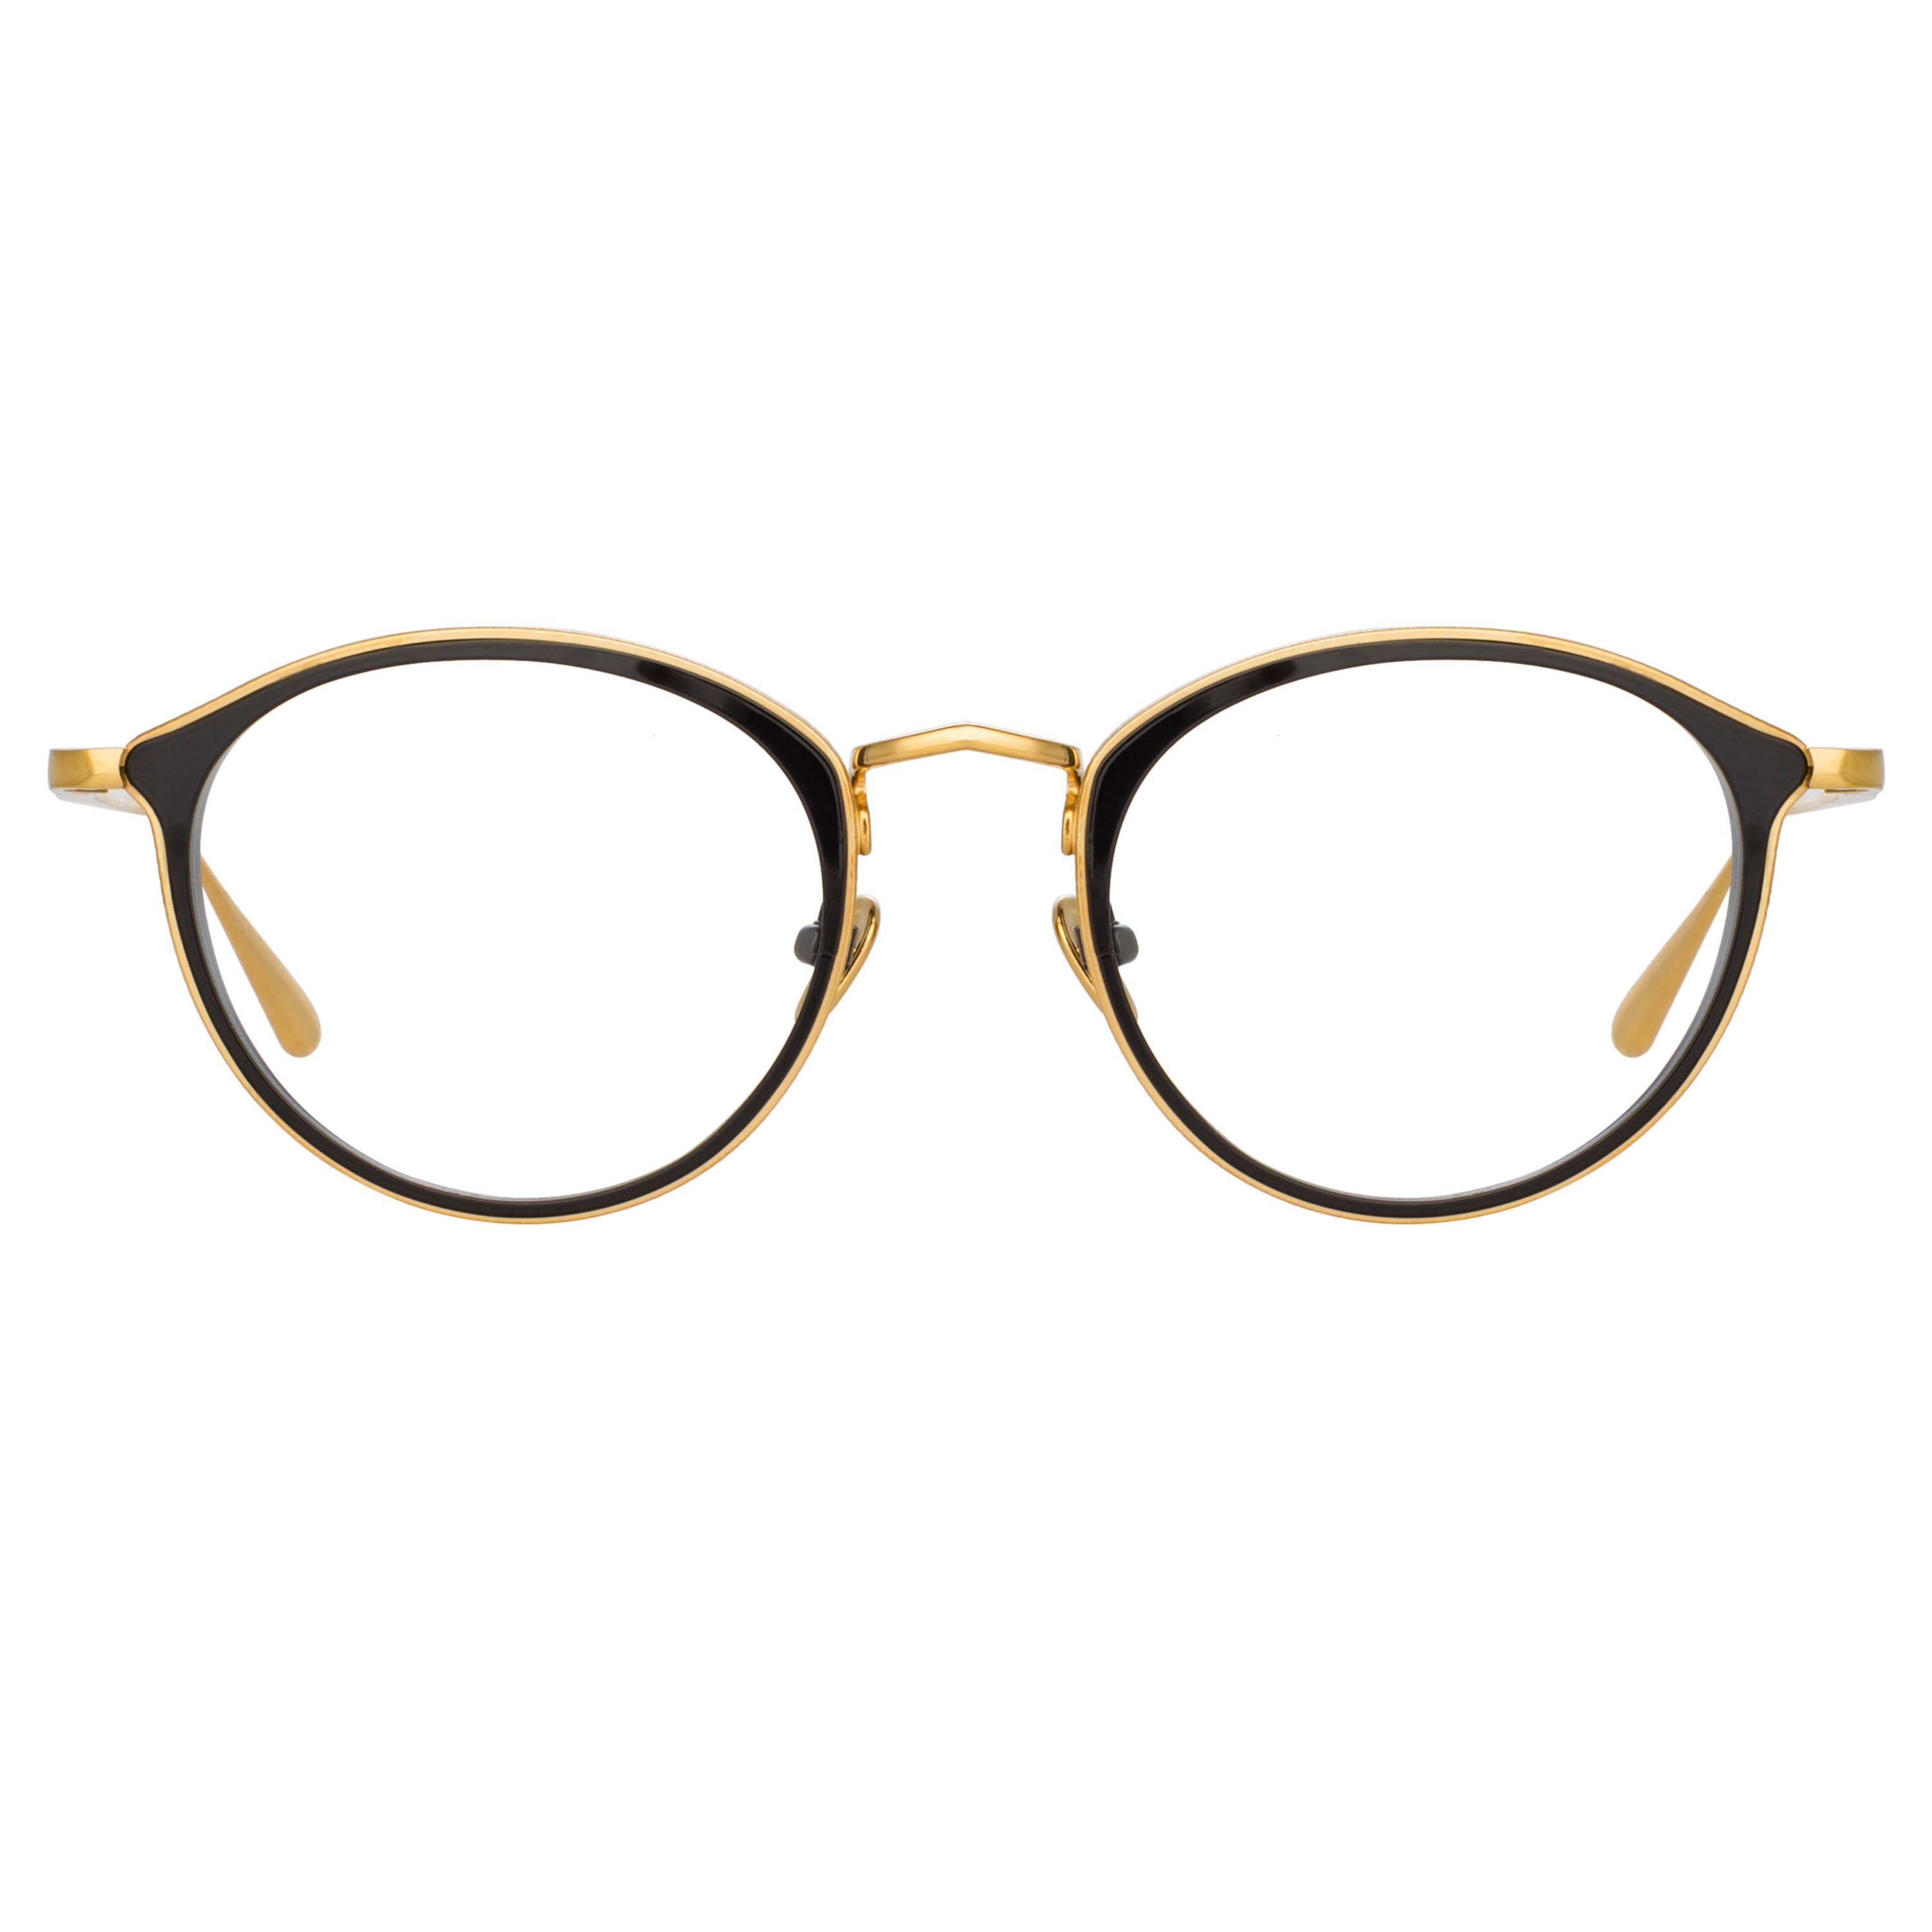 LUIS OVAL OPTICAL FRAME IN YELLOW GOLD AND BLACK - 1